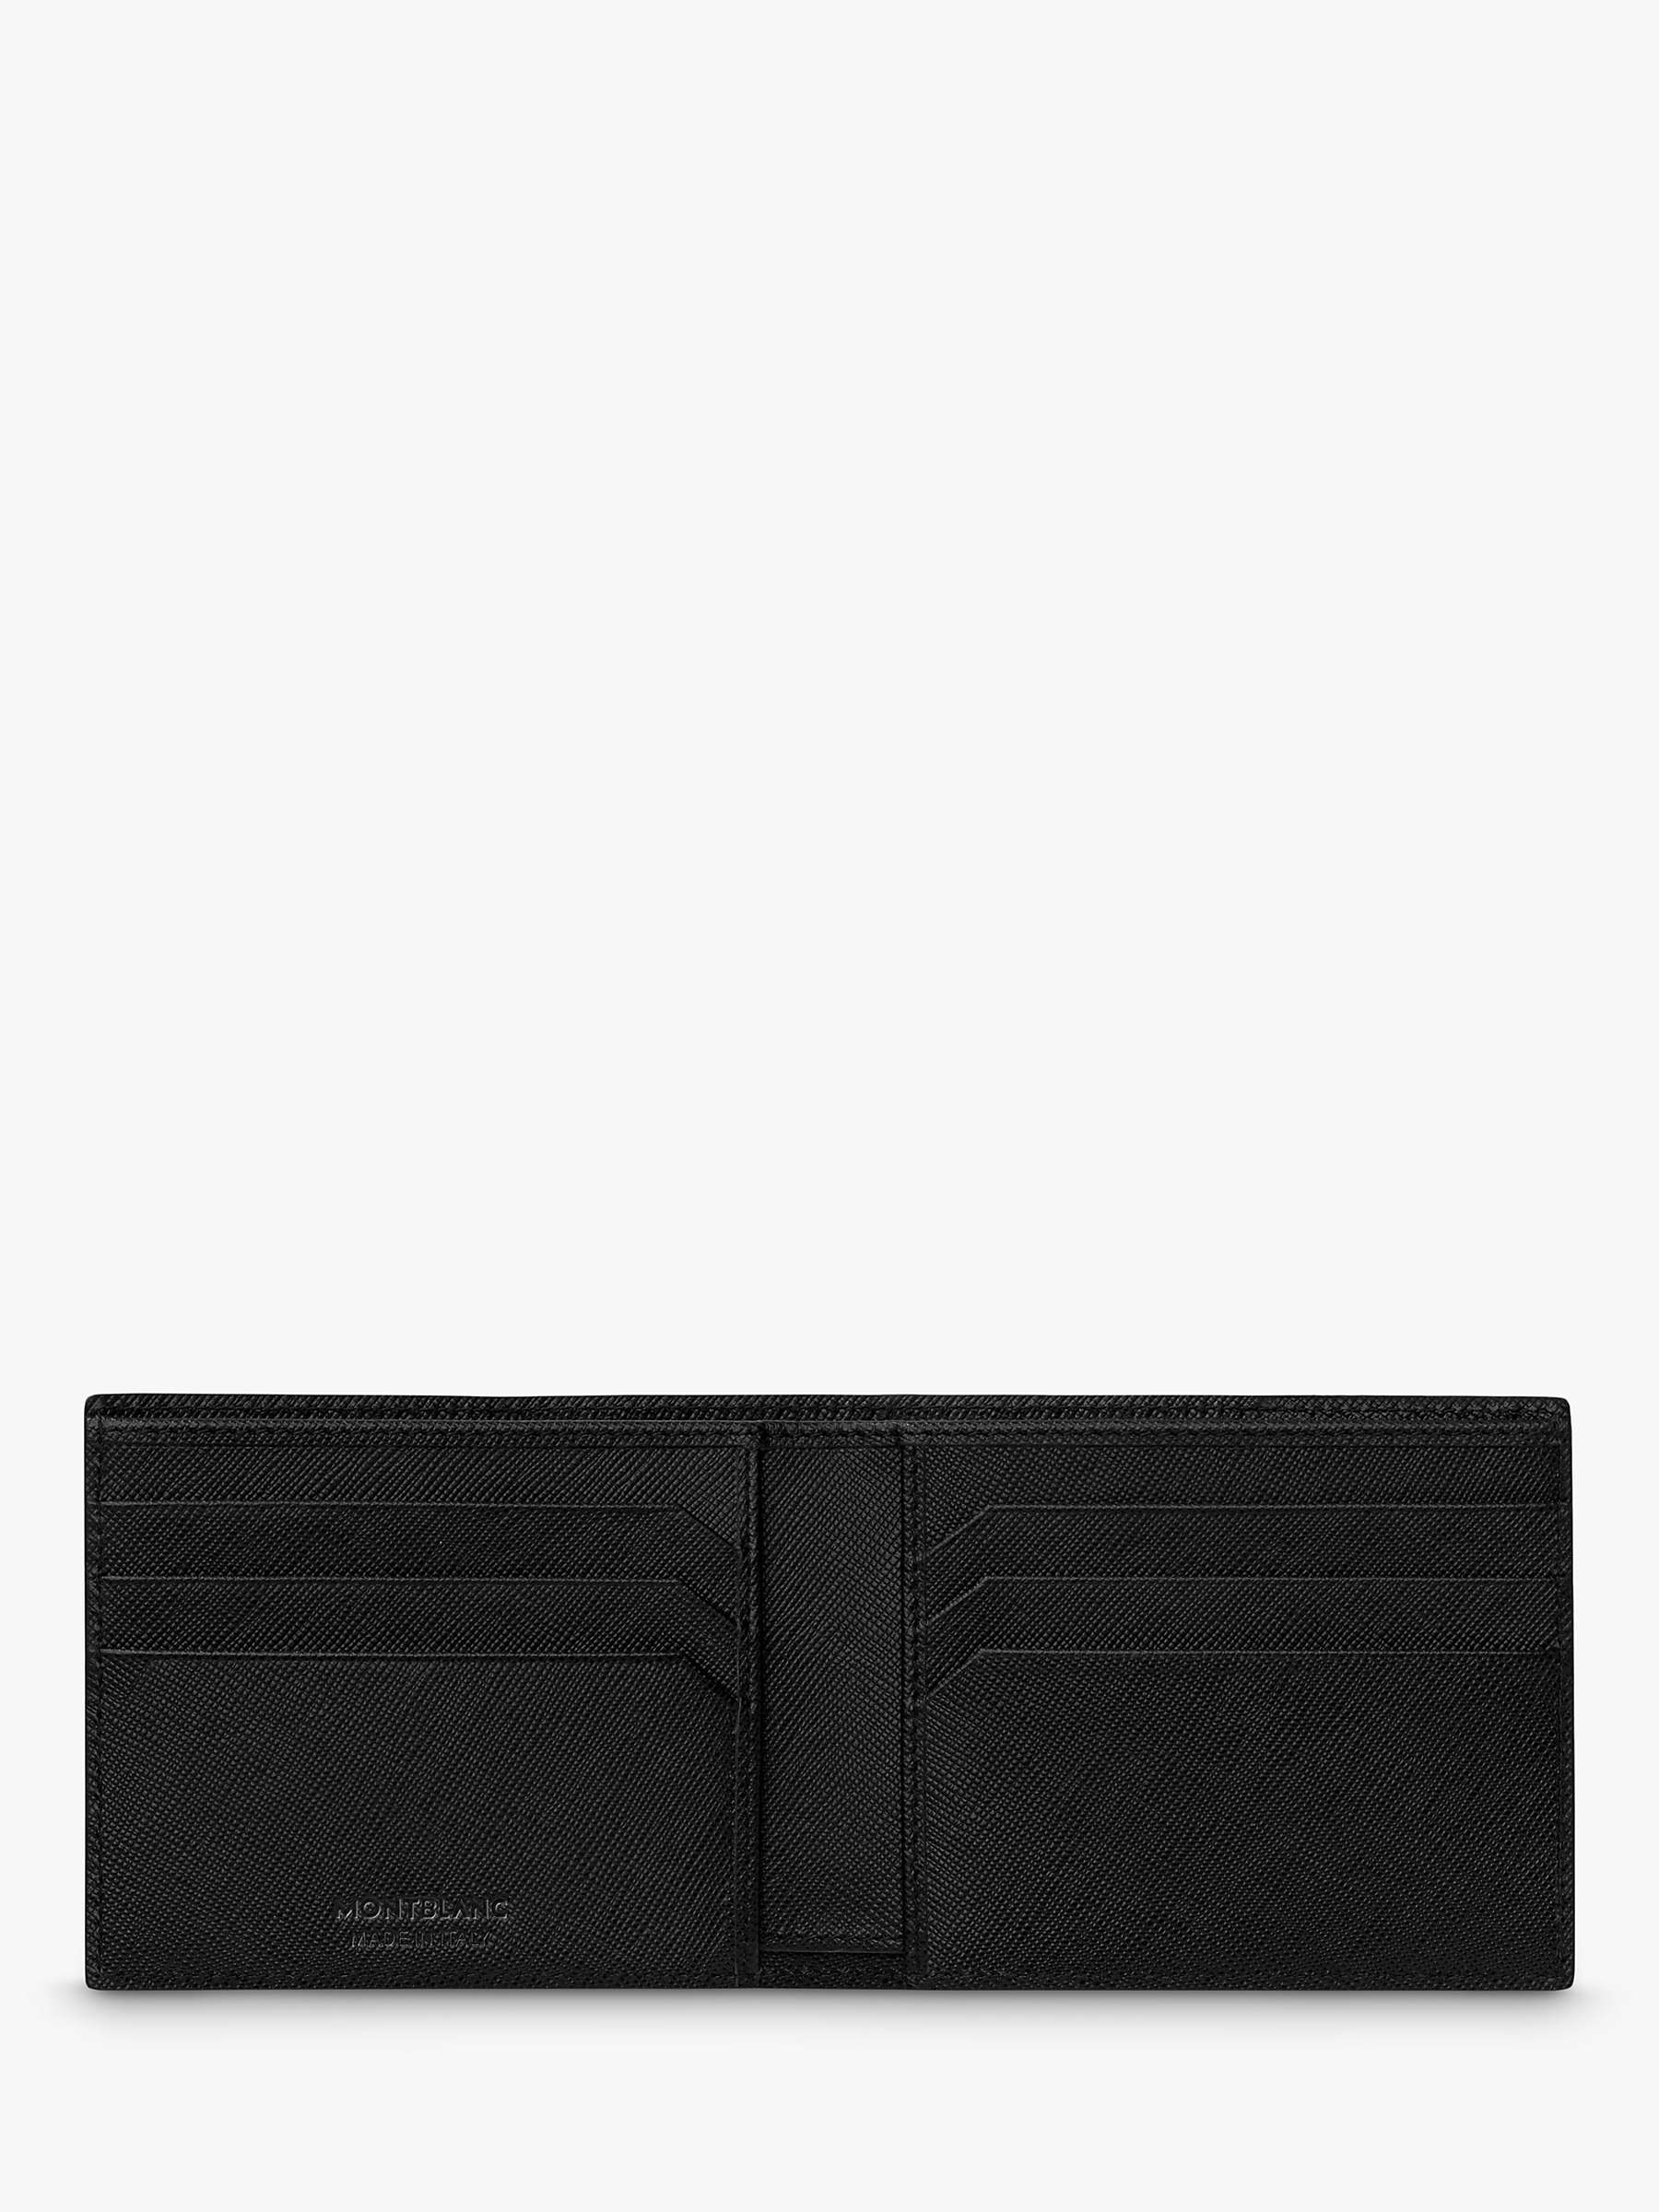 Buy Montblanc Sartorial Collection 6 Card Saffiano Leather Wallet, Black Online at johnlewis.com